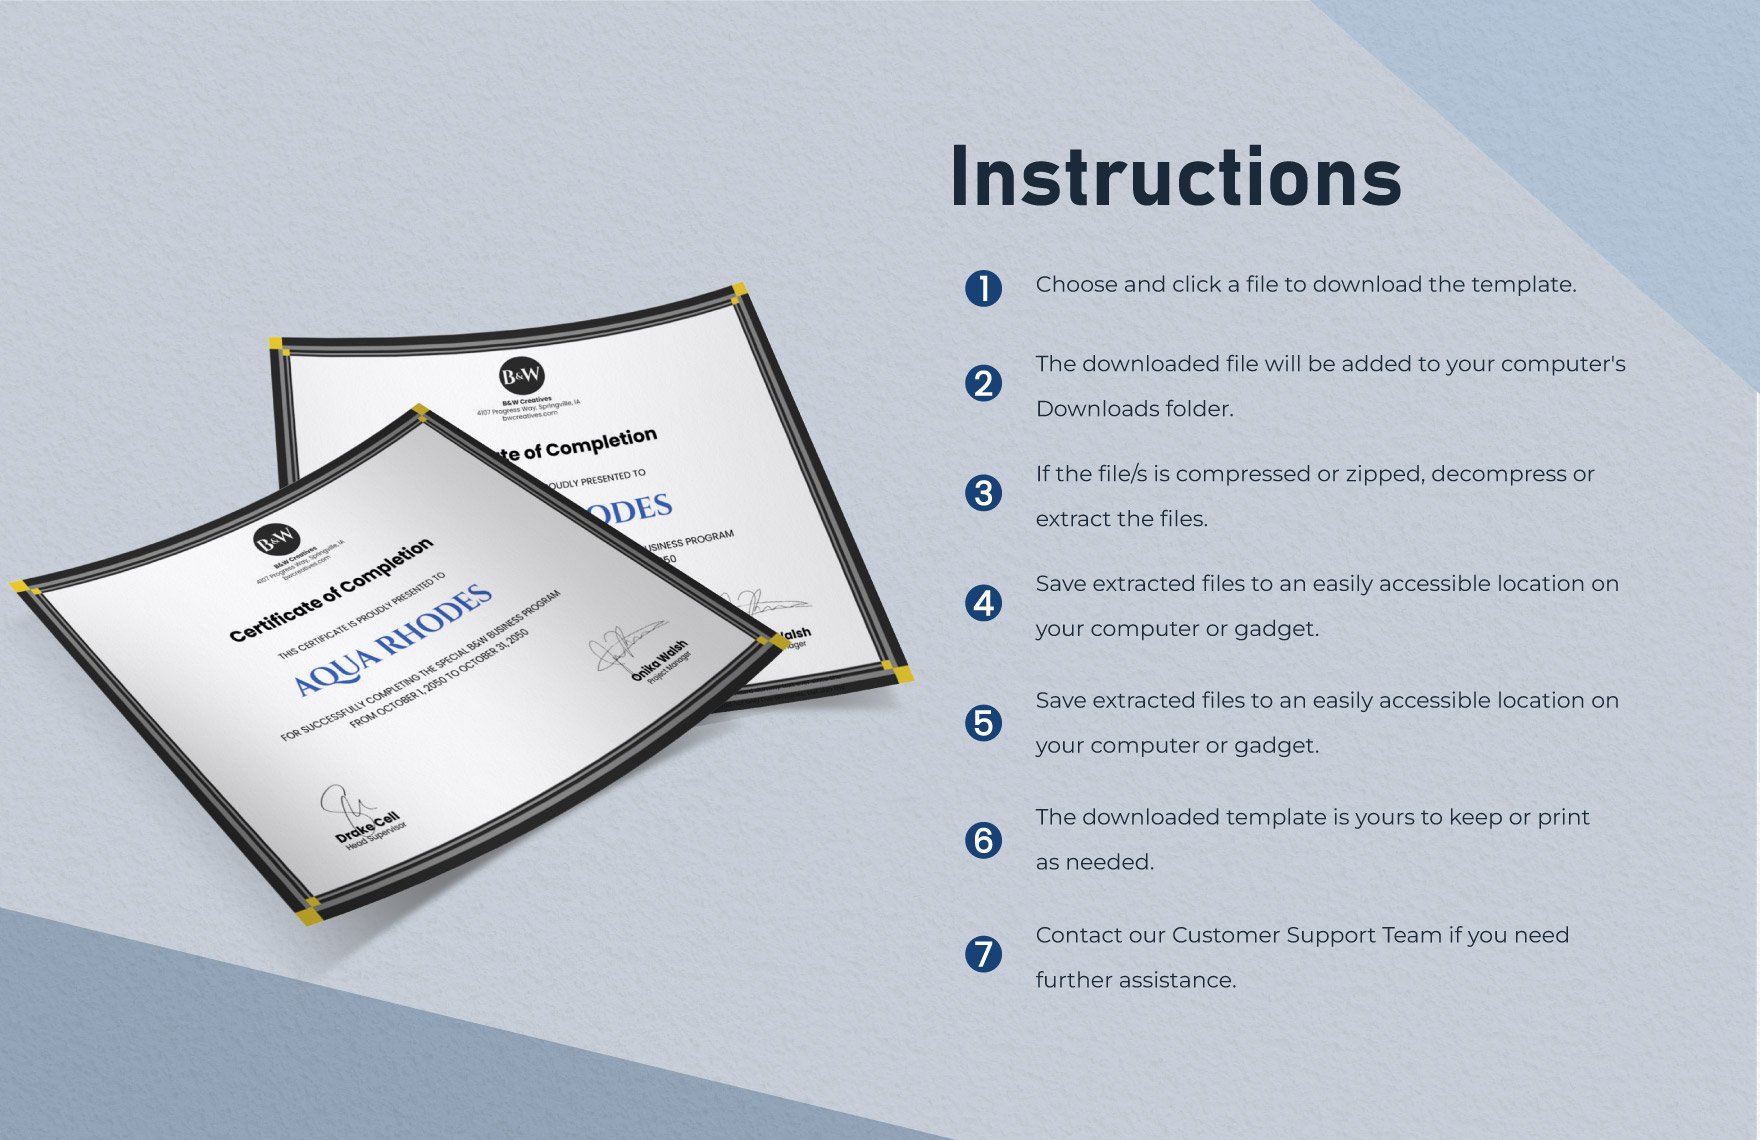 Business Program Completion Certificate Template